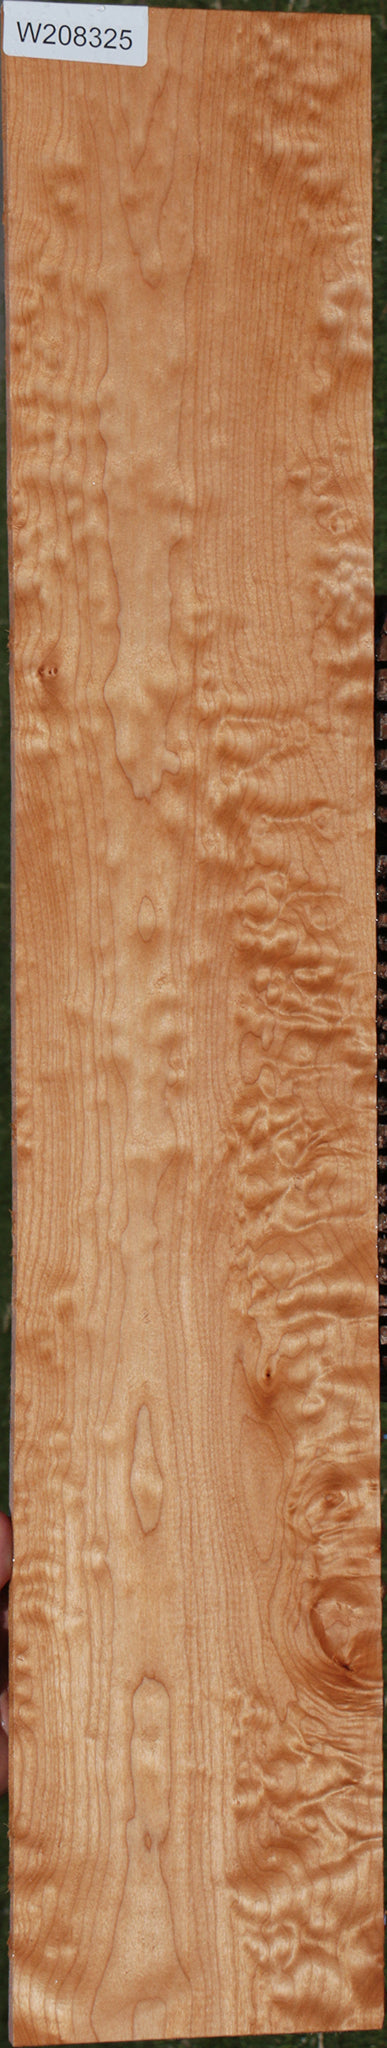 Extra Fancy Quilted Maple Micro Lumber